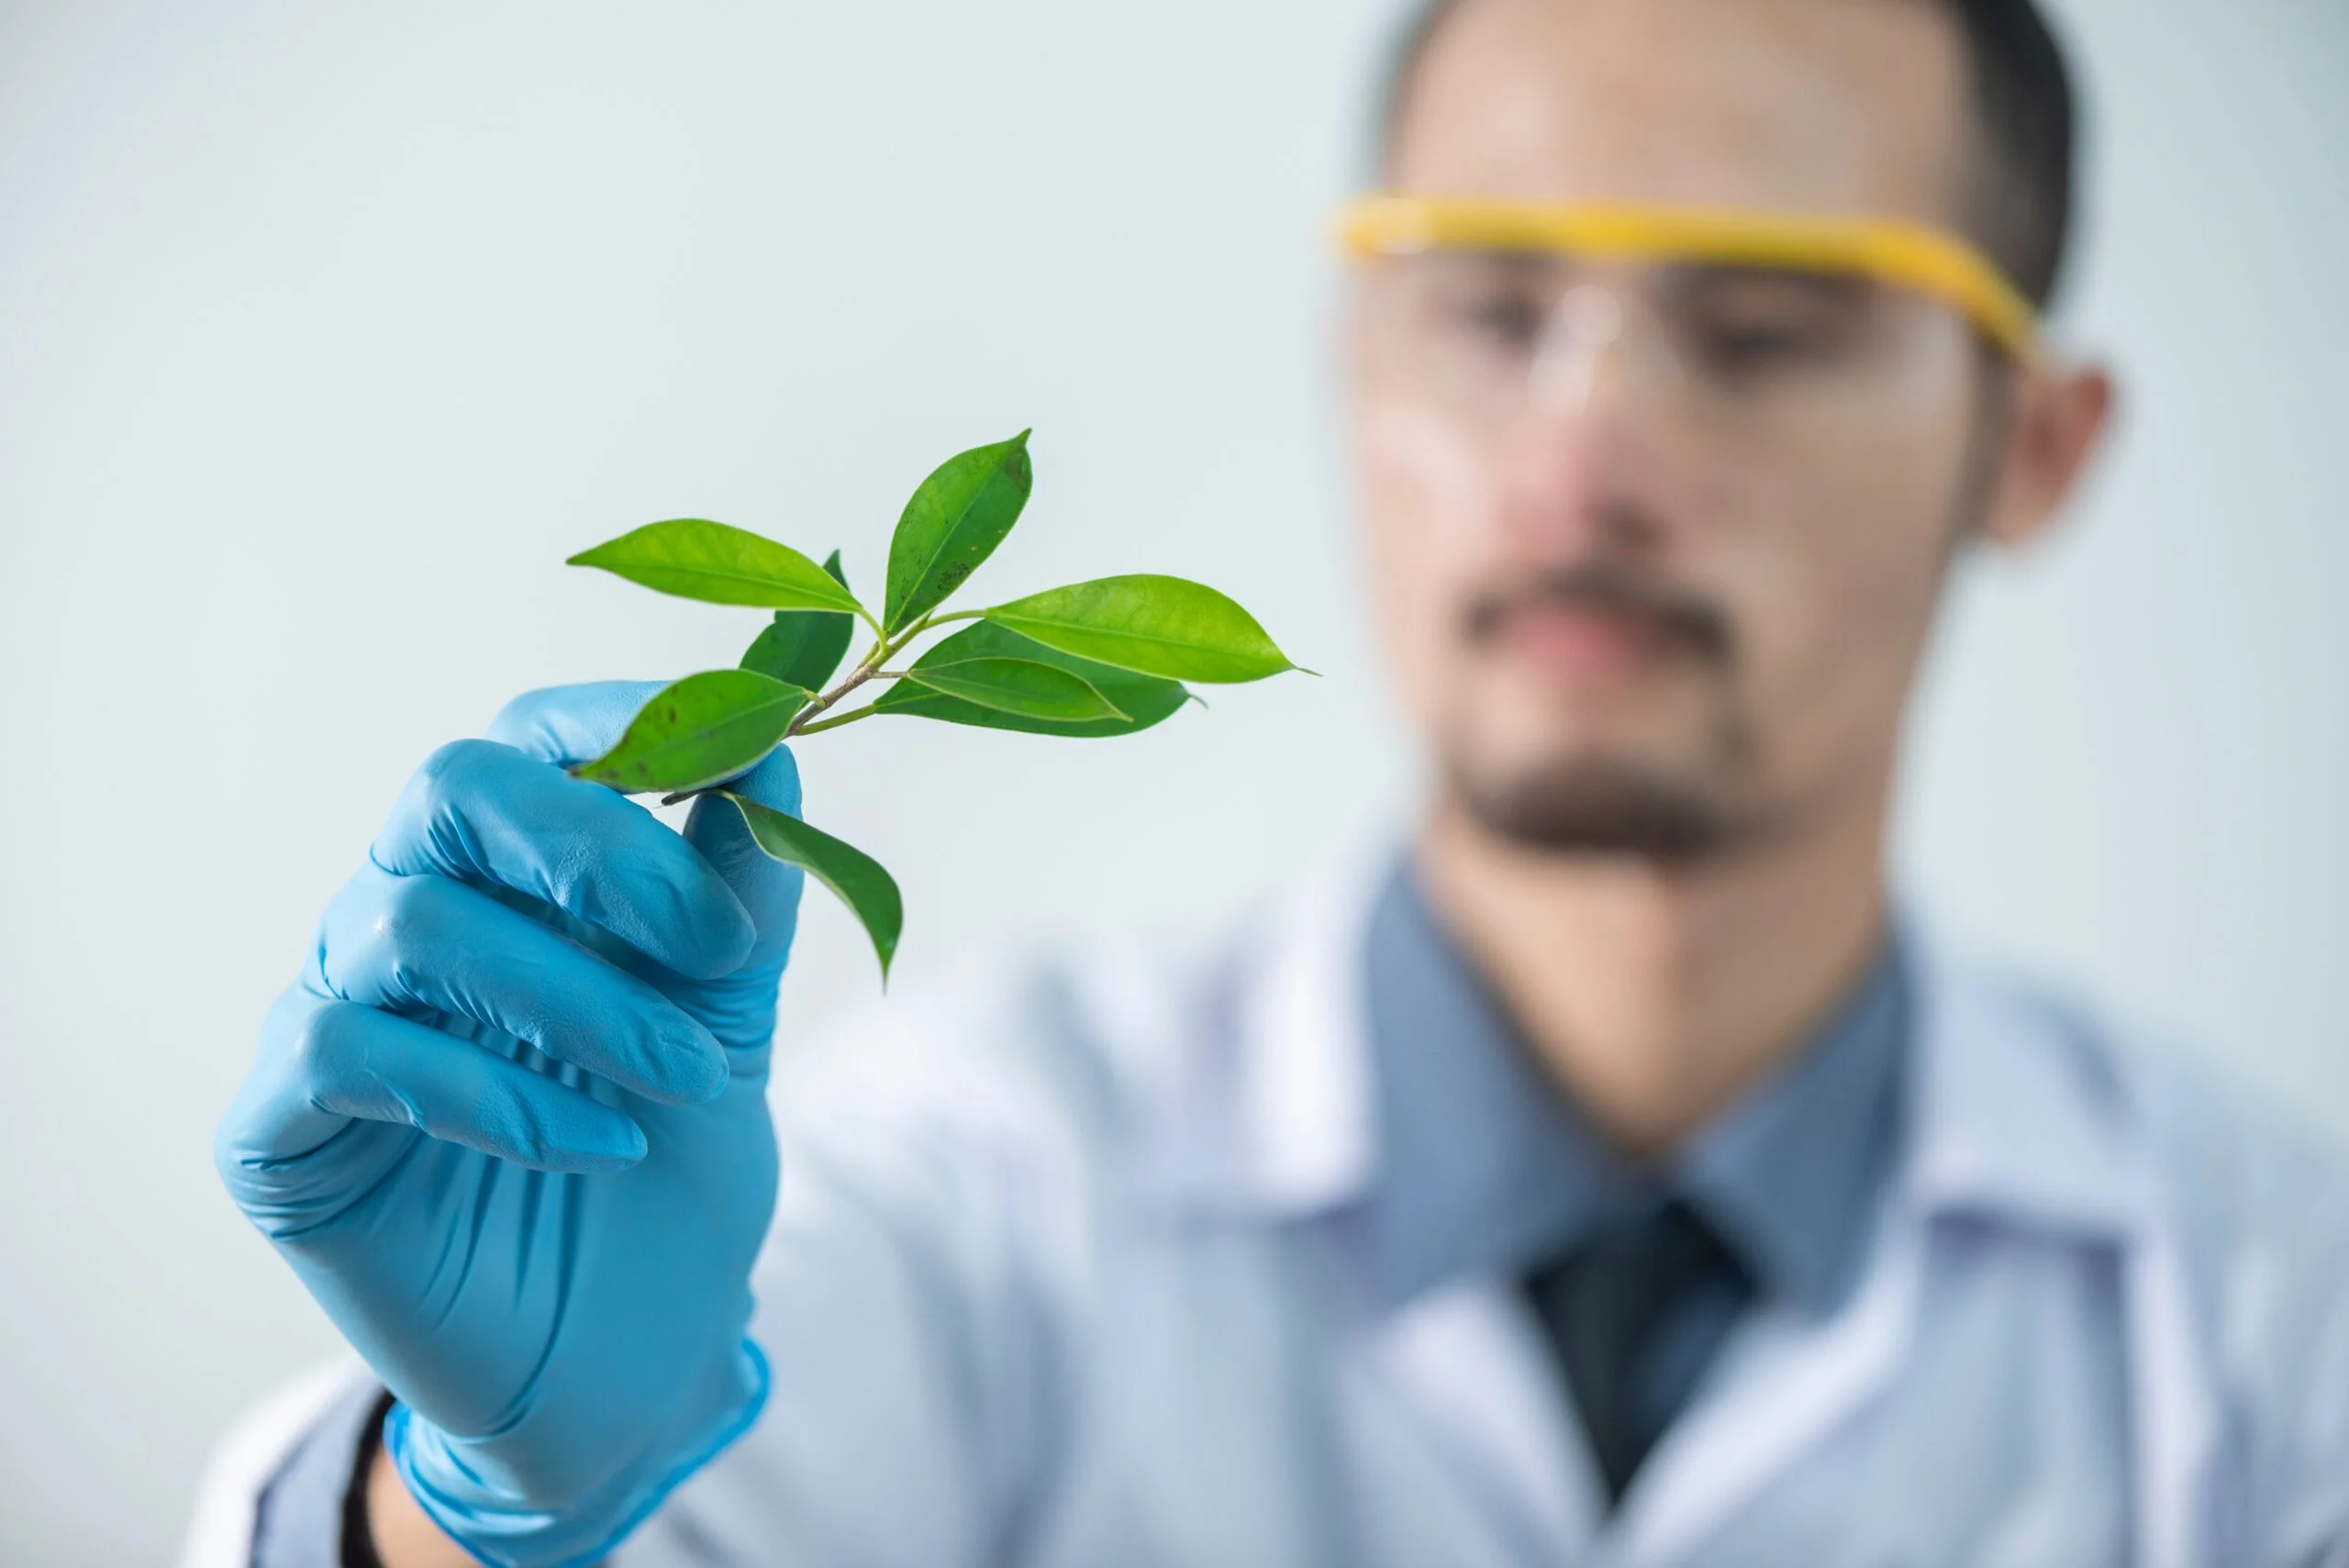 Man scientist inspecting a plant